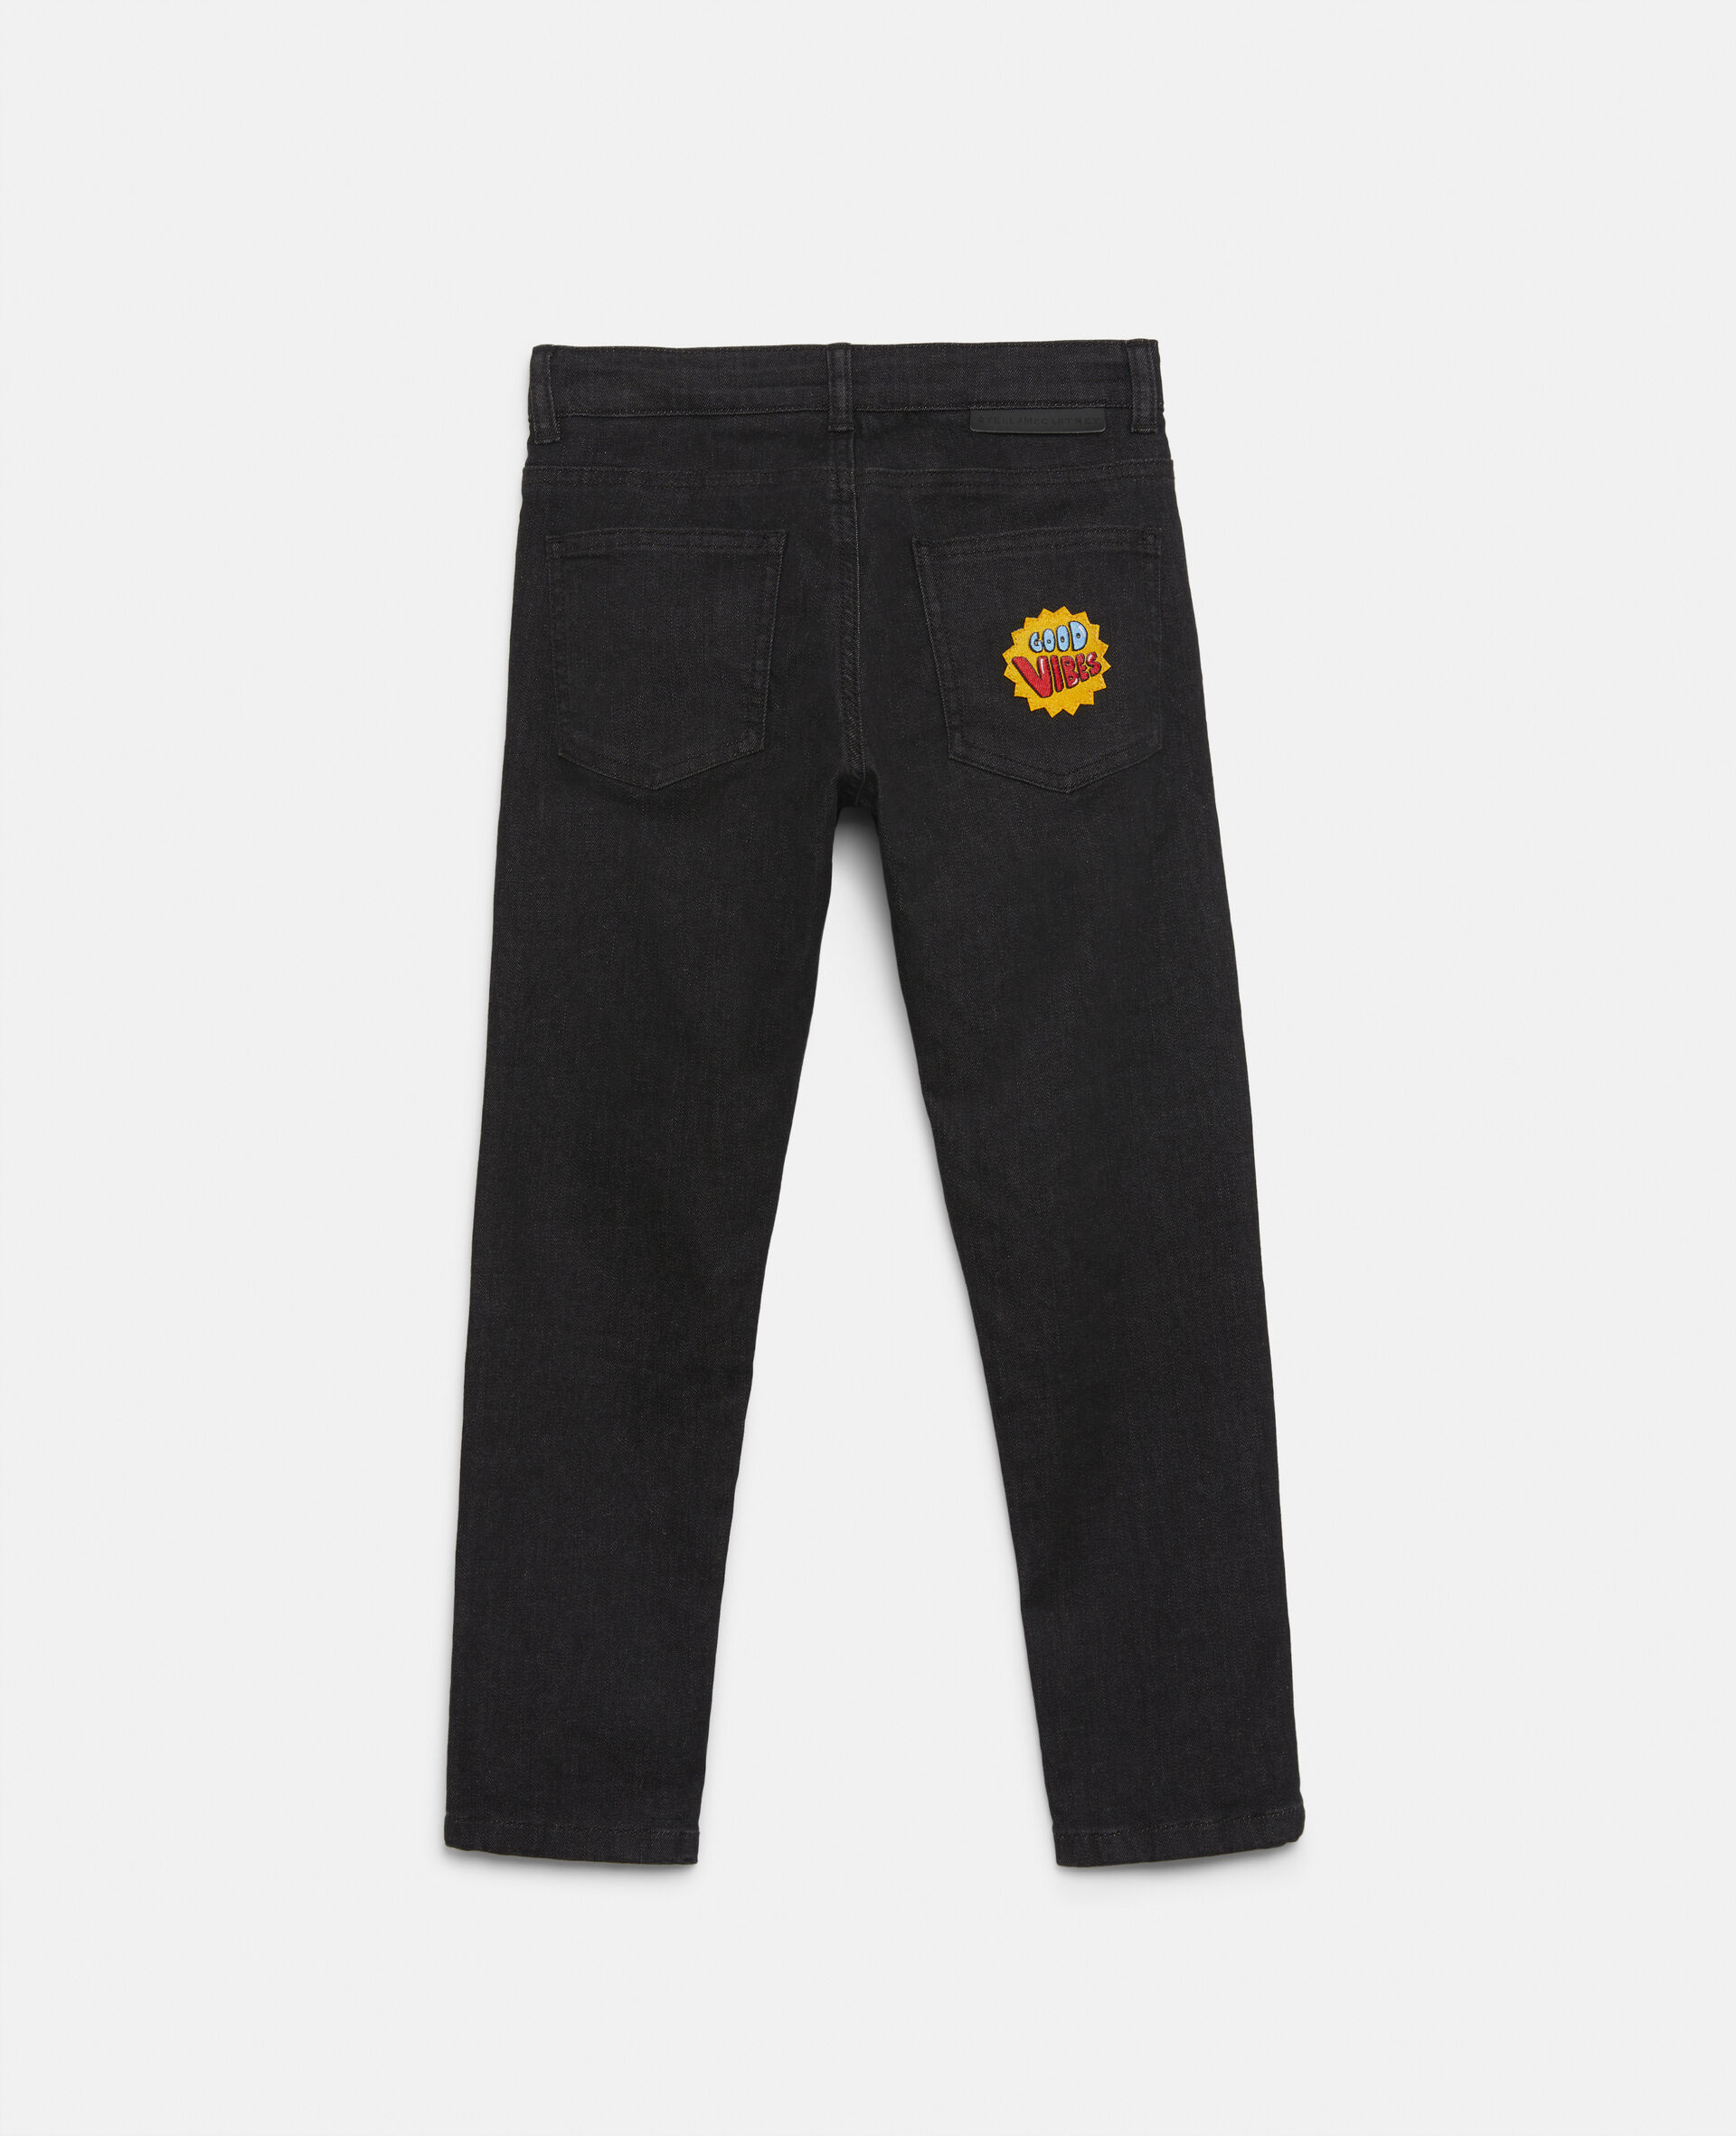 Ice Lolly Badges Denim Trousers-Black-large image number 2